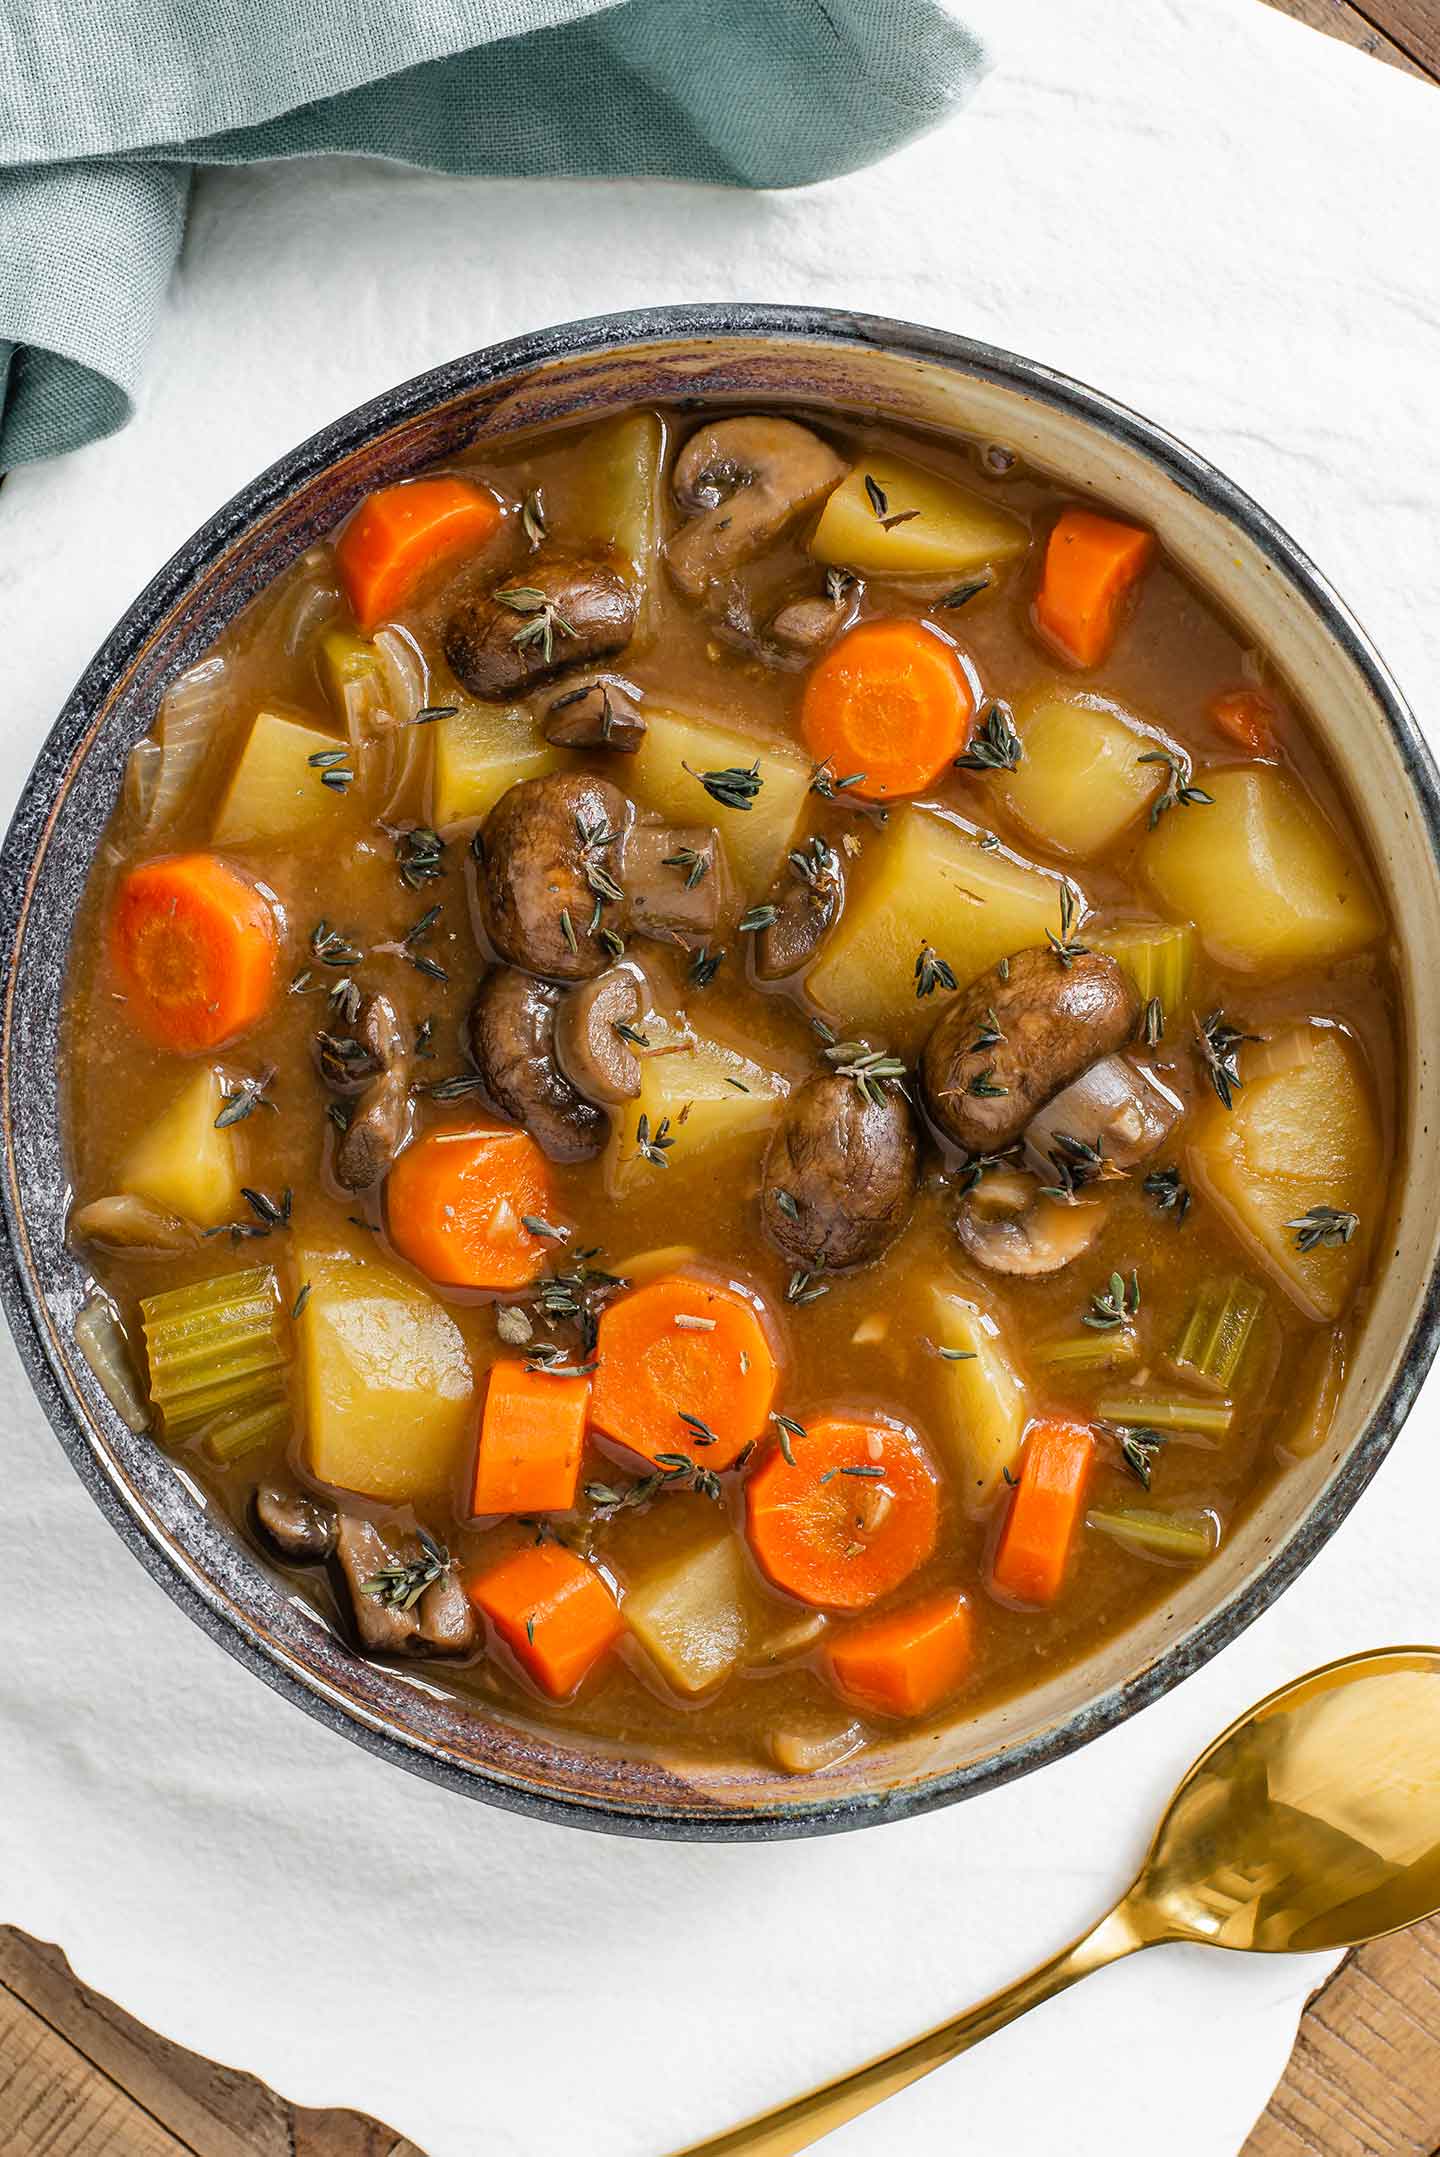 Top down view of a shallow bowl filled with thick vegan Irish Guinness stew. Mushrooms, potatoes, carrots, and celery in a thick gravy.